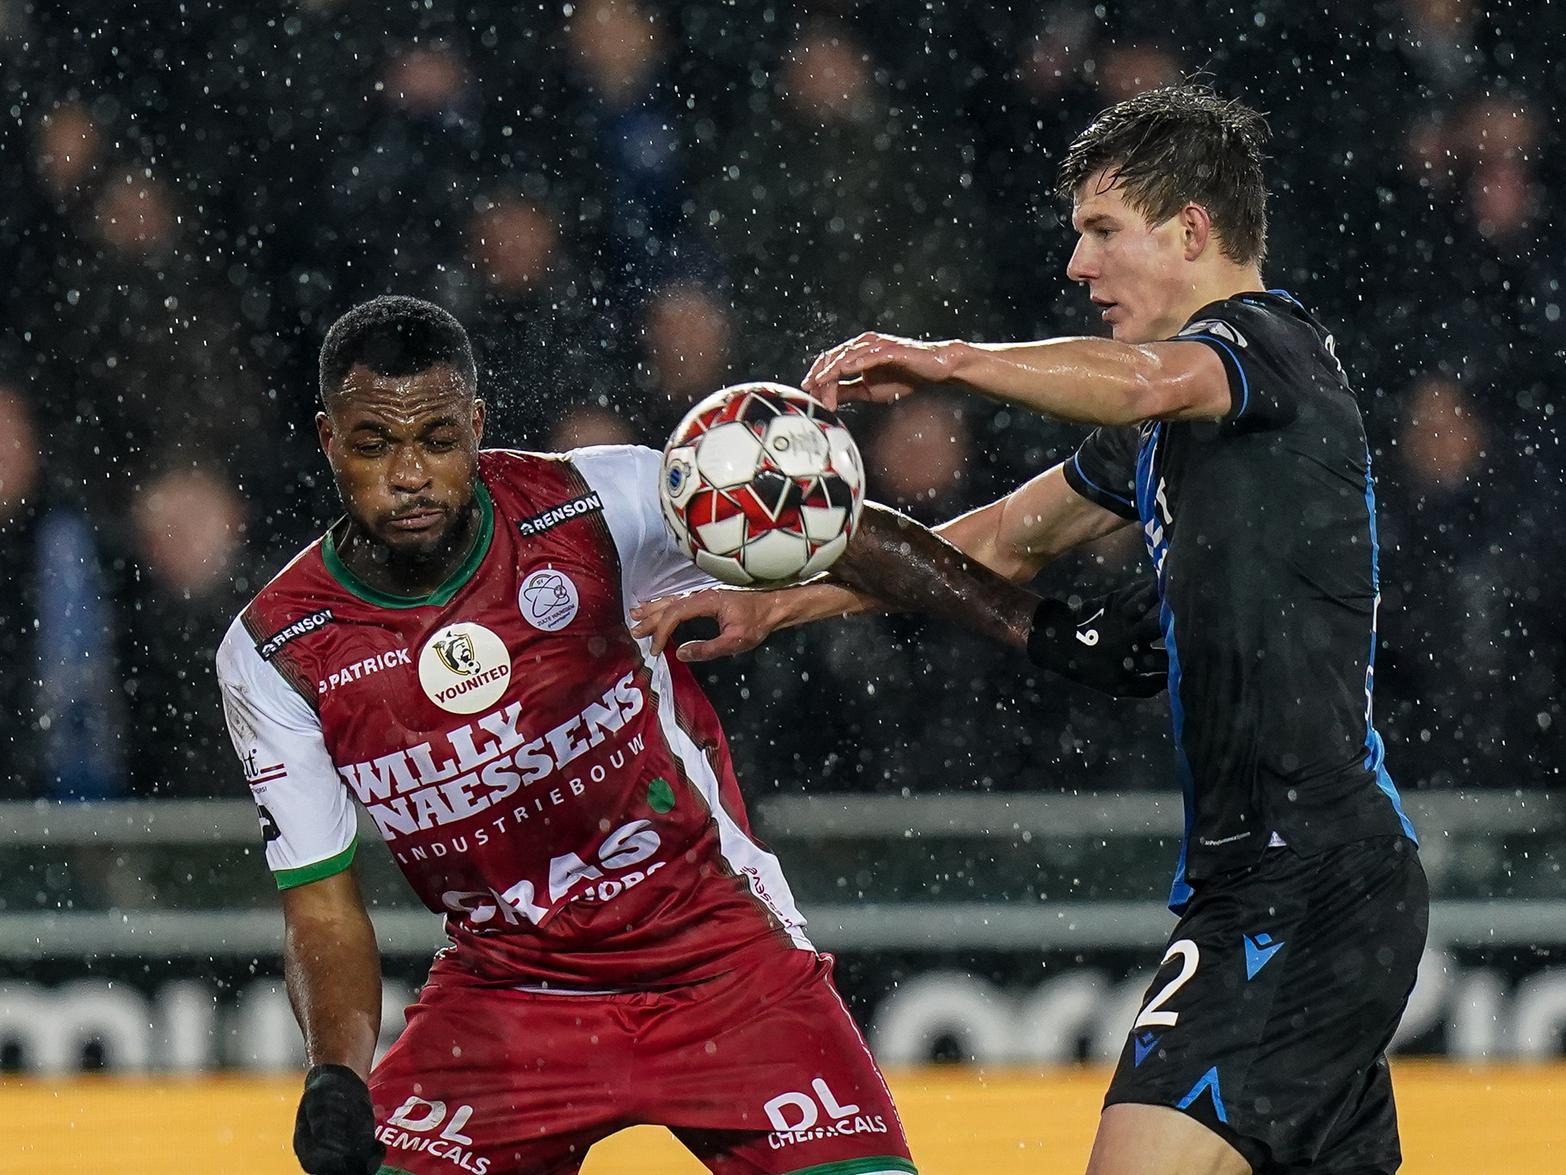 Leeds United are said to be keeping tabs on Besiktas' striker Cyle Larin, who has scored nine goals on loan with Zulte Waregem this season. He's been capped at senior level for Canada. (Fotospor)